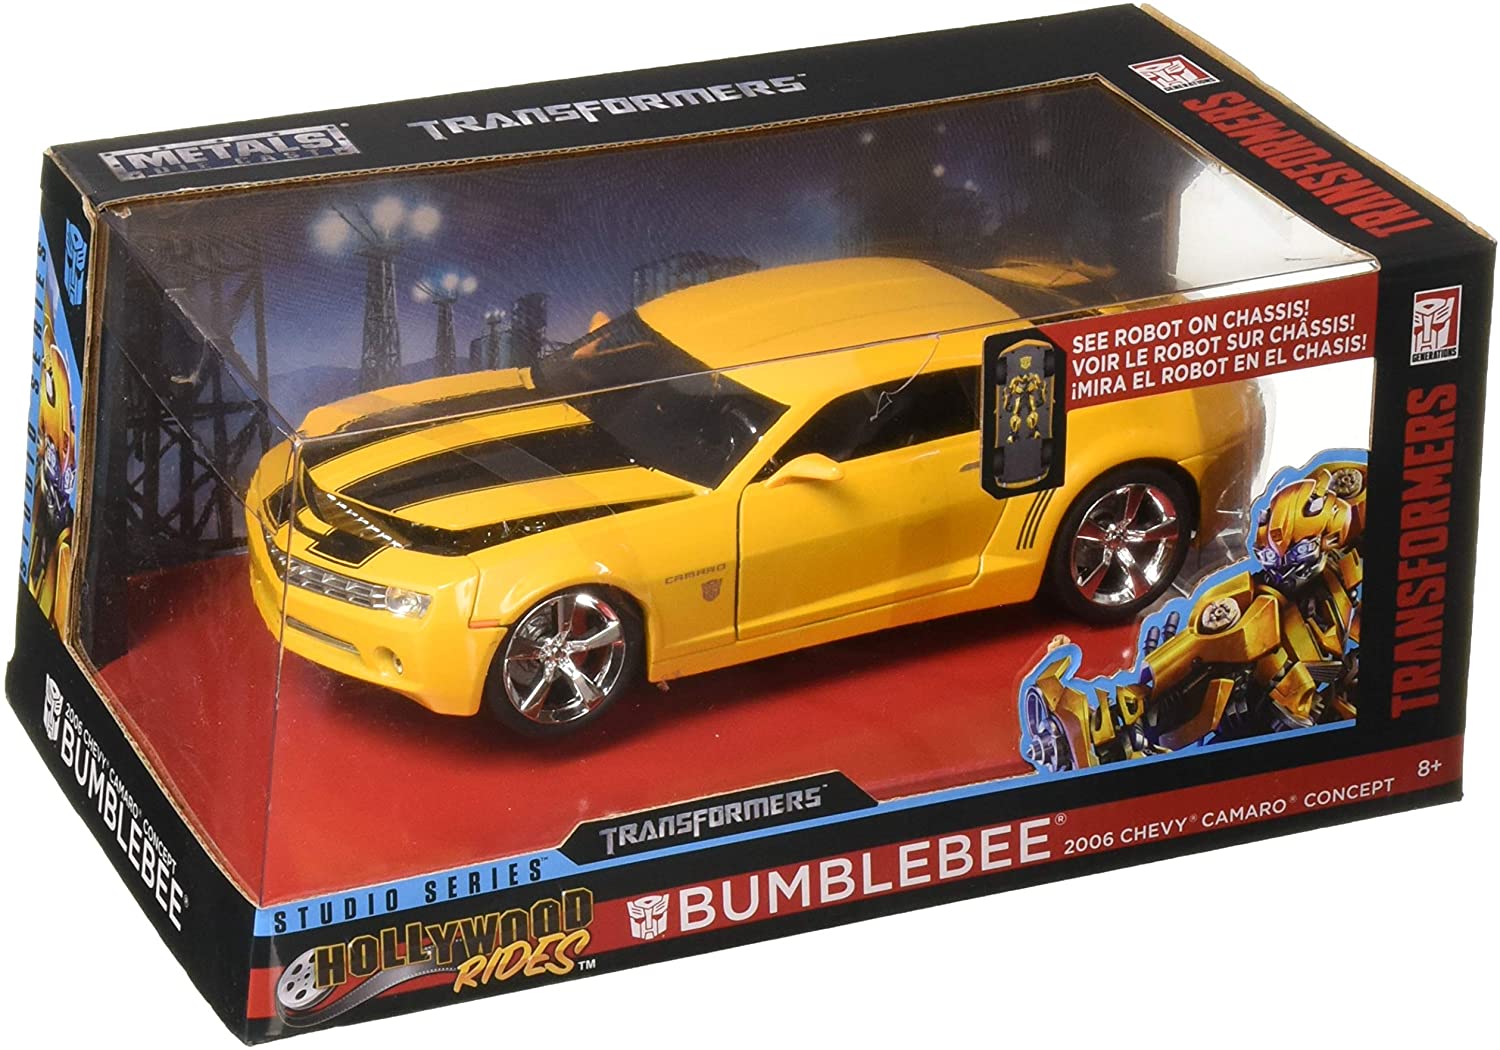 Transformers Bumblebee 2006 Chevy Camaro Concept Die-cast Car, 1:24 Scale Vehicle, Yellow